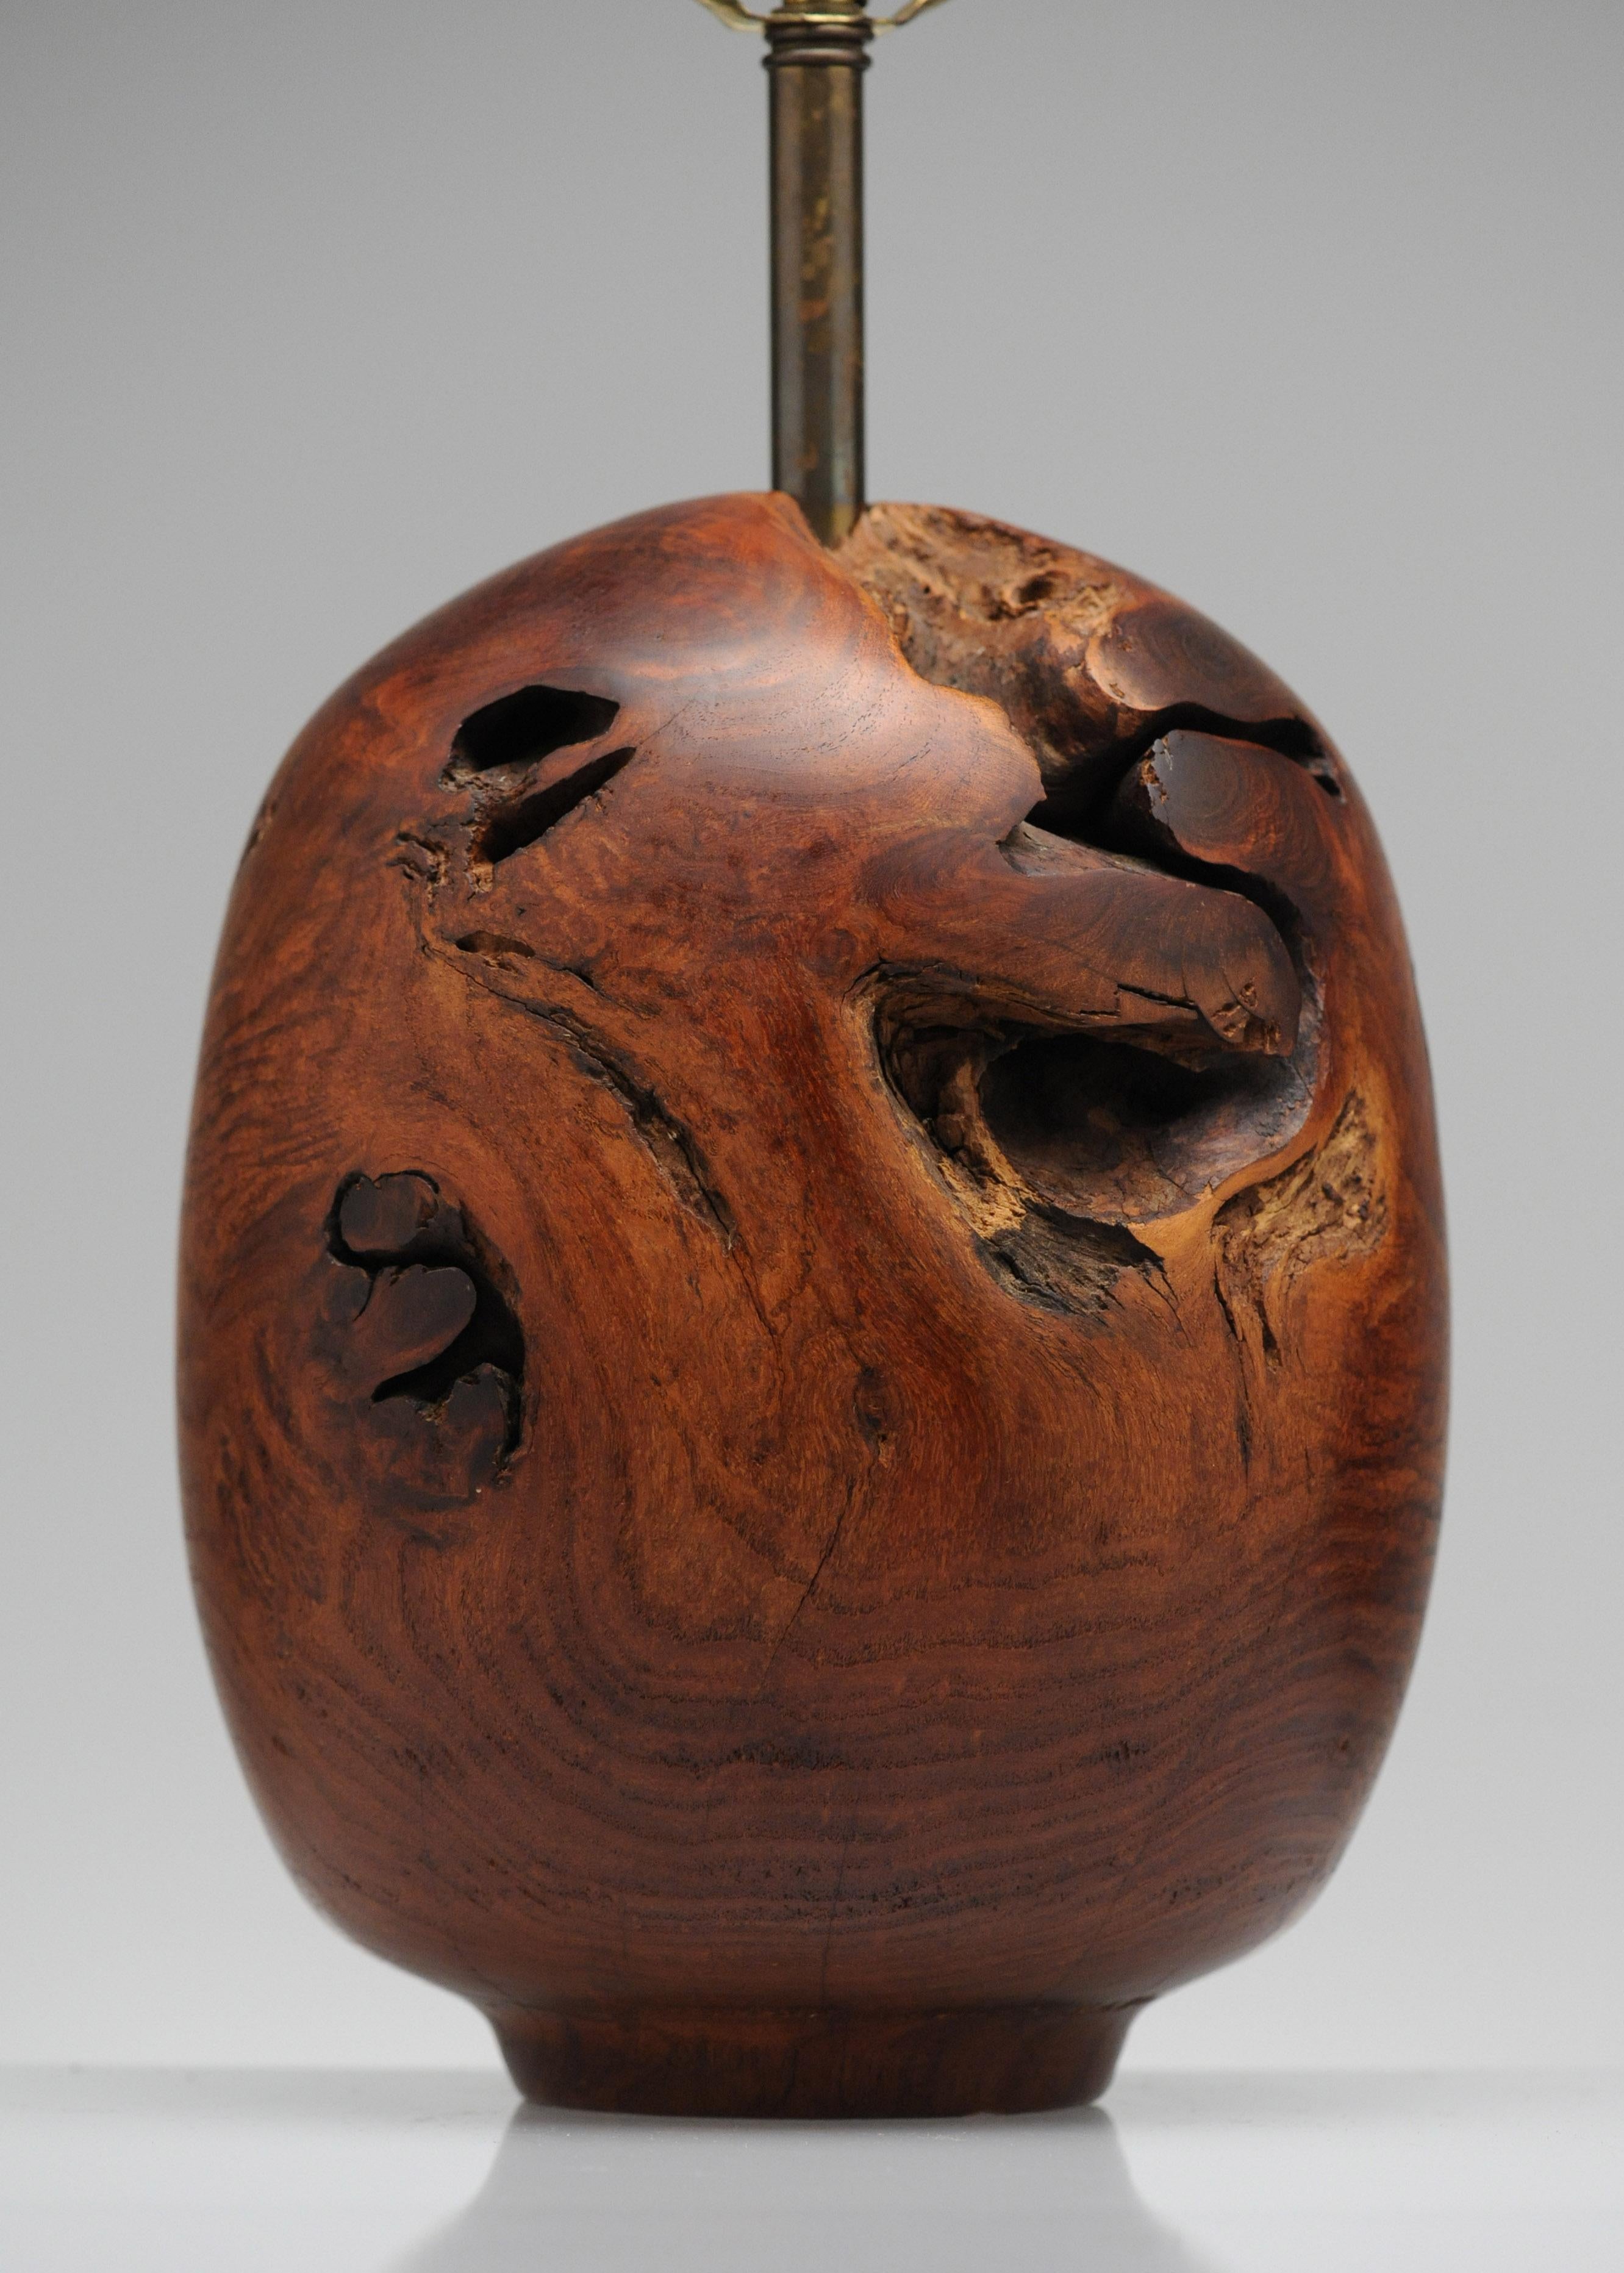 American Organic Sculpture Turned Mesquite Table Lamp by Chris Eggers